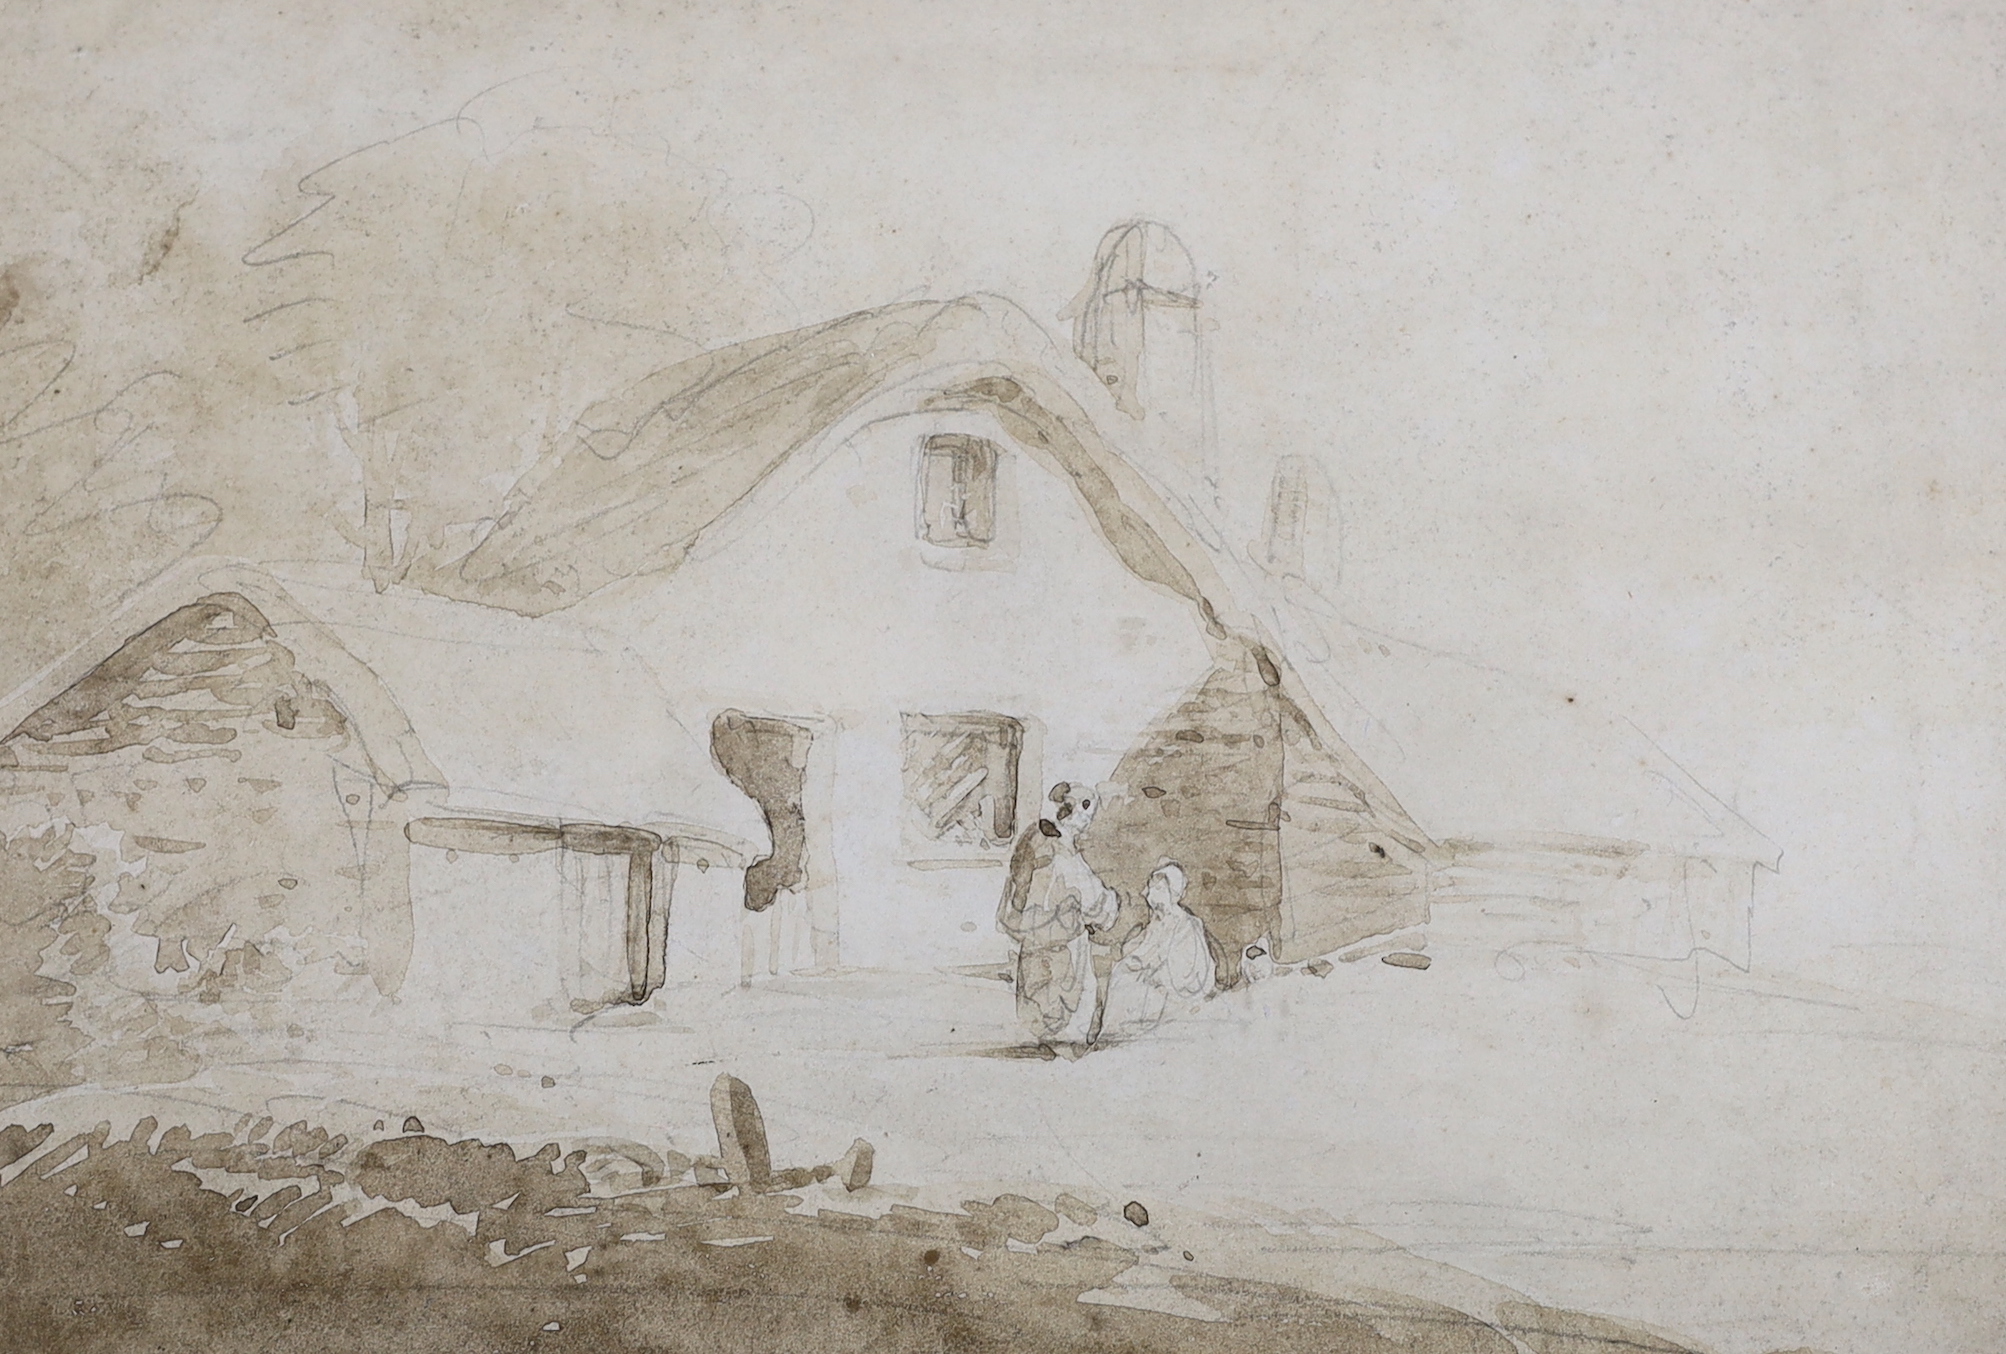 Two sepia ink and watercolours comprising Henry William Brooke (1772-1860) and William Payne (c.1760-1830), one inscribed verso 'Bought from Abbott & Holder', largest 15.5 x 22.5cm